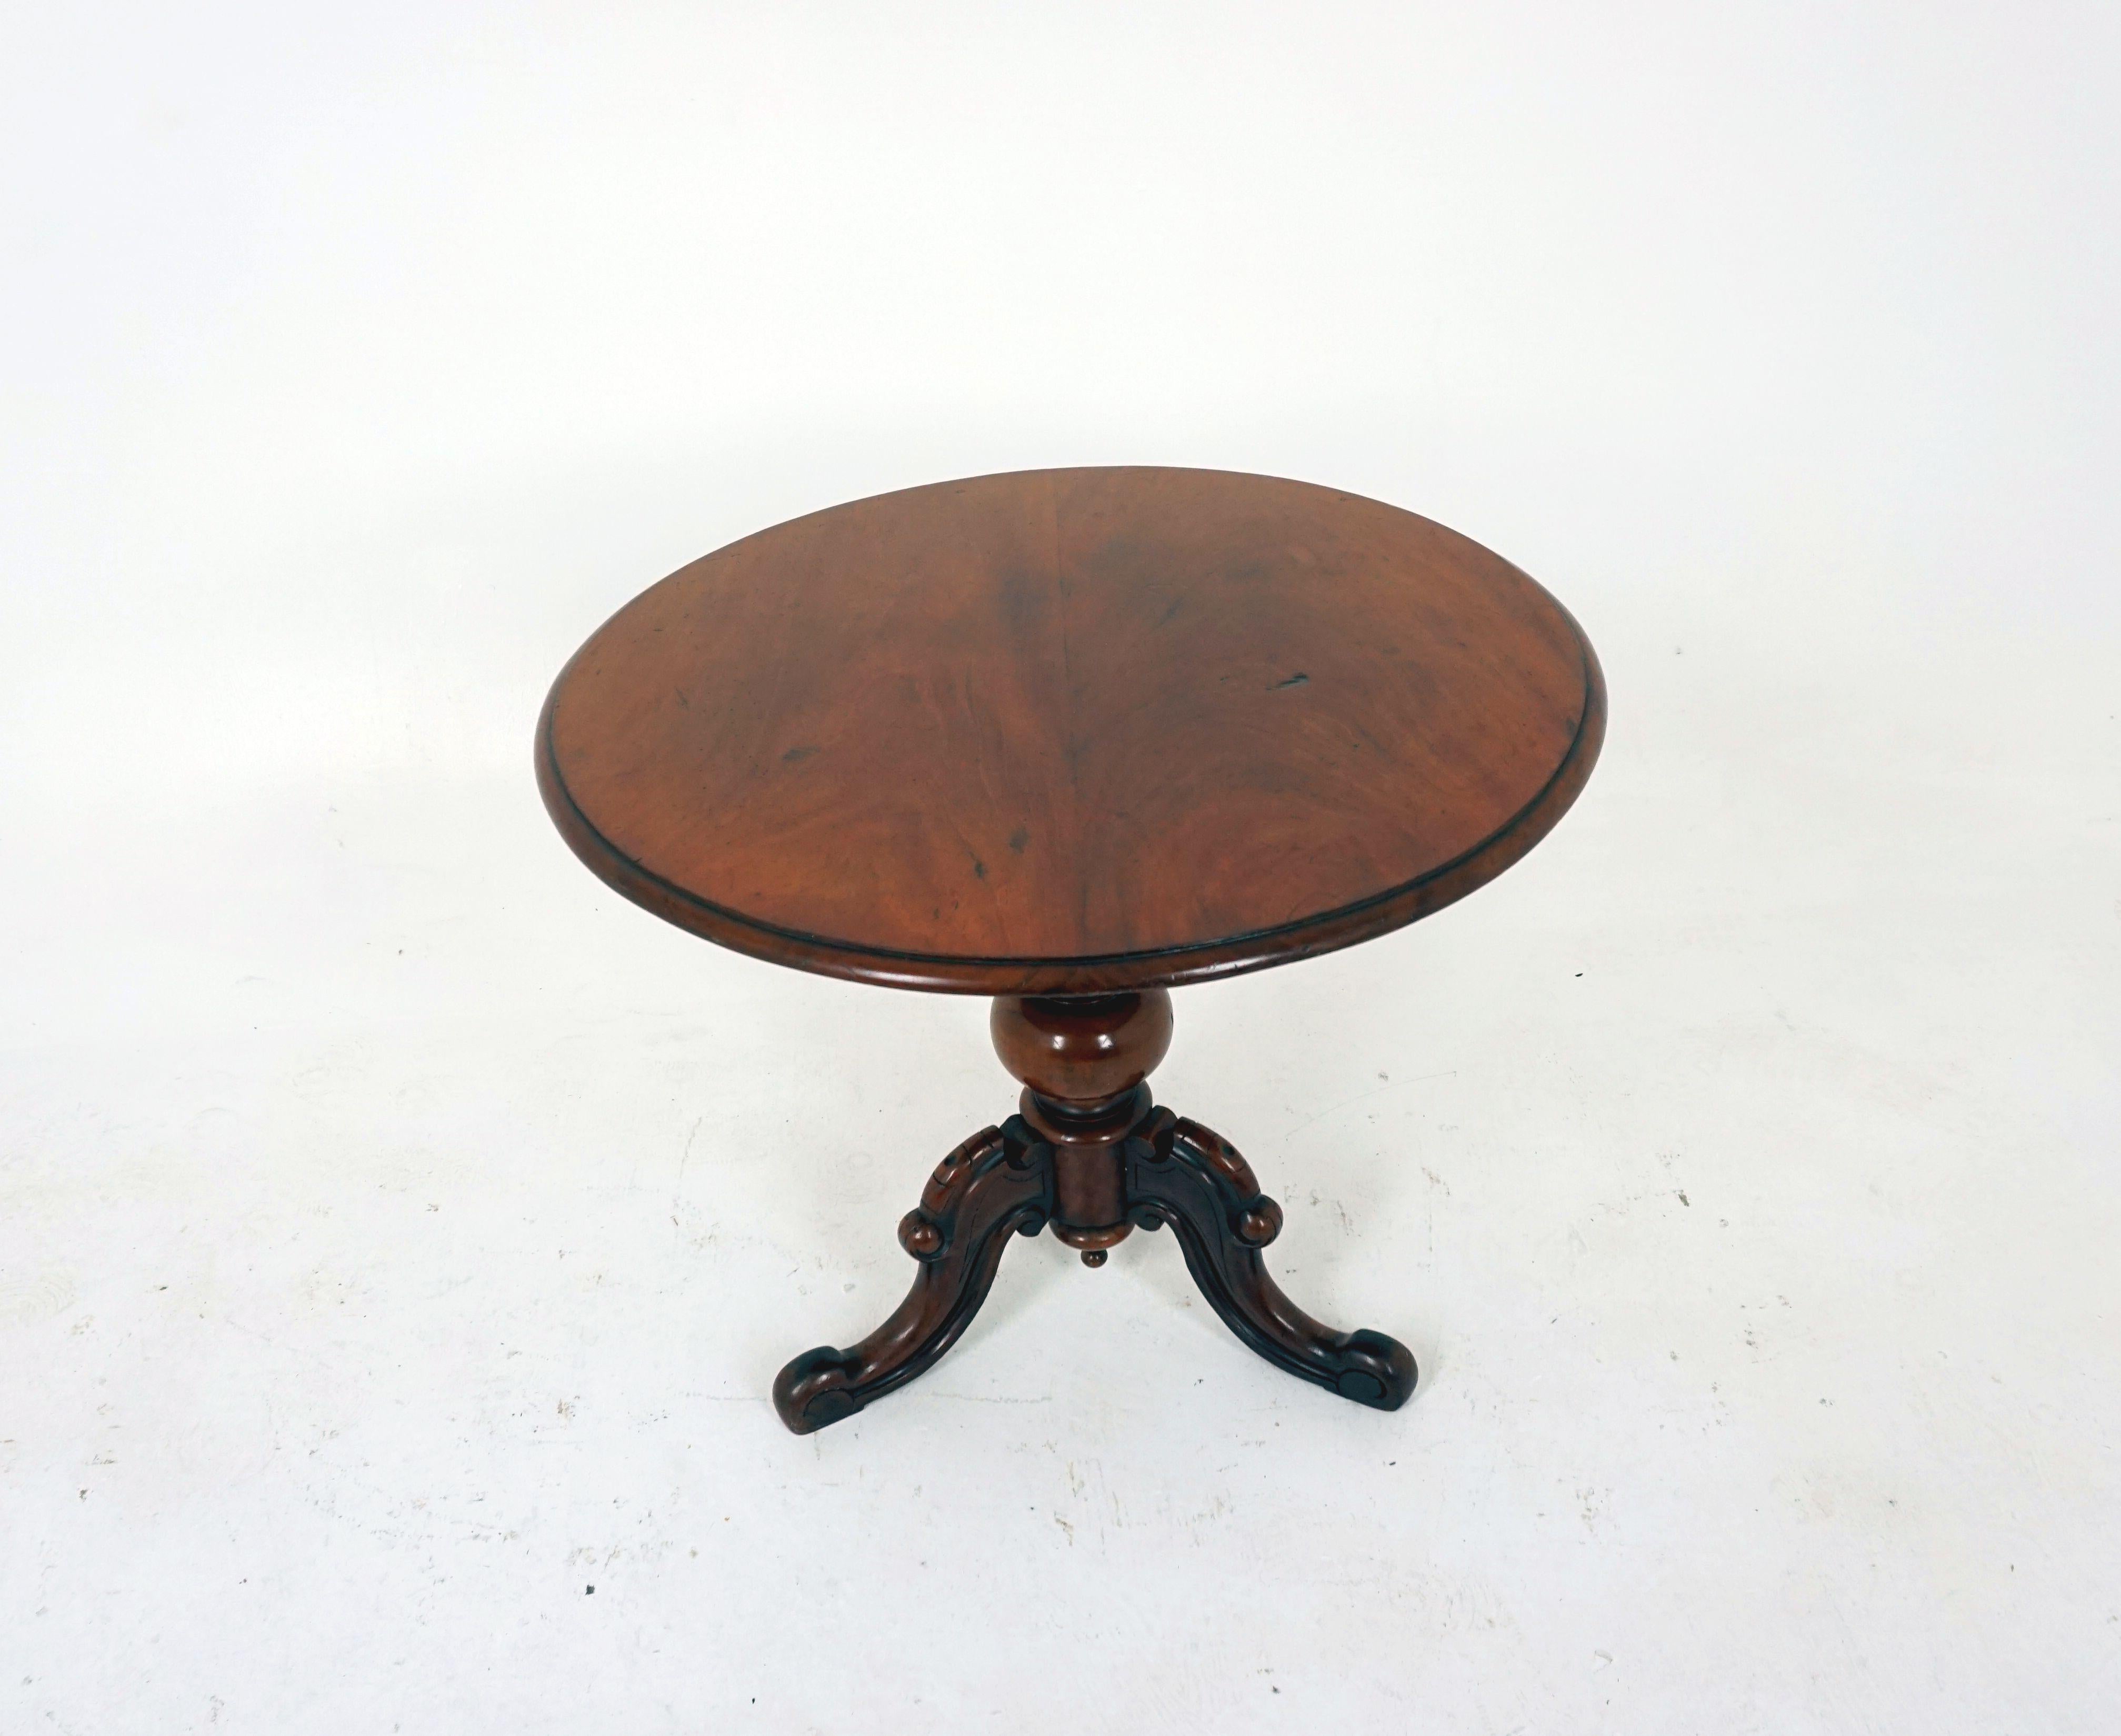 Antique tilt-top table, Victorian walnut breakfast table with circular top, antique furniture, Scotland 1880, B1915

Scotland, 1880
Solid walnut
Original Finish
Circular top has a moulded edge
Stands on a beautiful turned central support
With